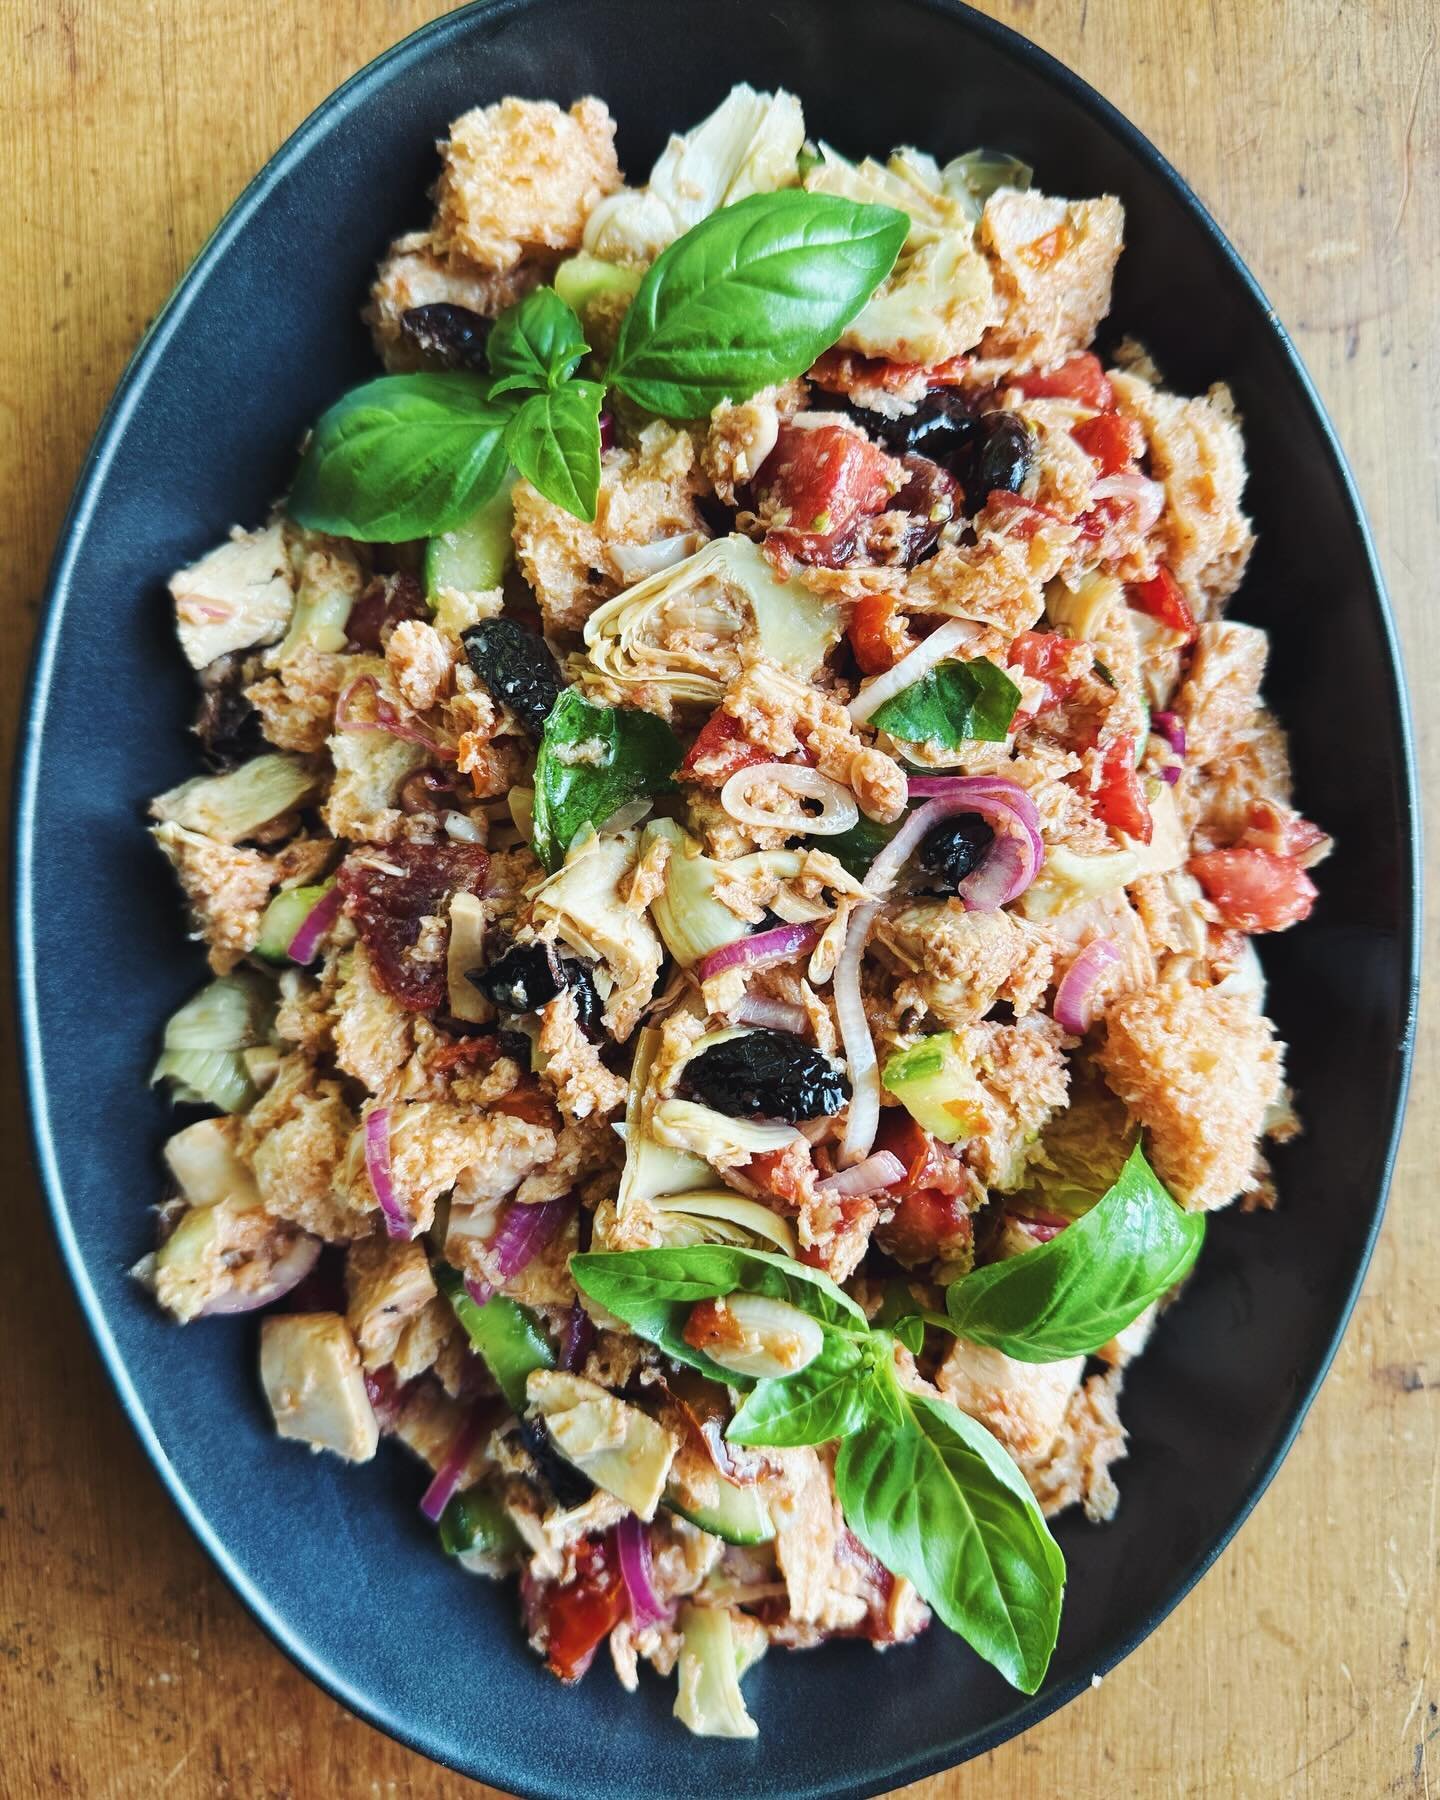 Stasera una panzanella all&rsquo;improvviso ~ a sort of thrown together panzanella salad using mostly pantry ingredients: tuna in olive oil, cured olives, bottled artichokes, roasted tomatoes, plus cukes, fresh tomatoes &amp; sliced onion. Tossed wit